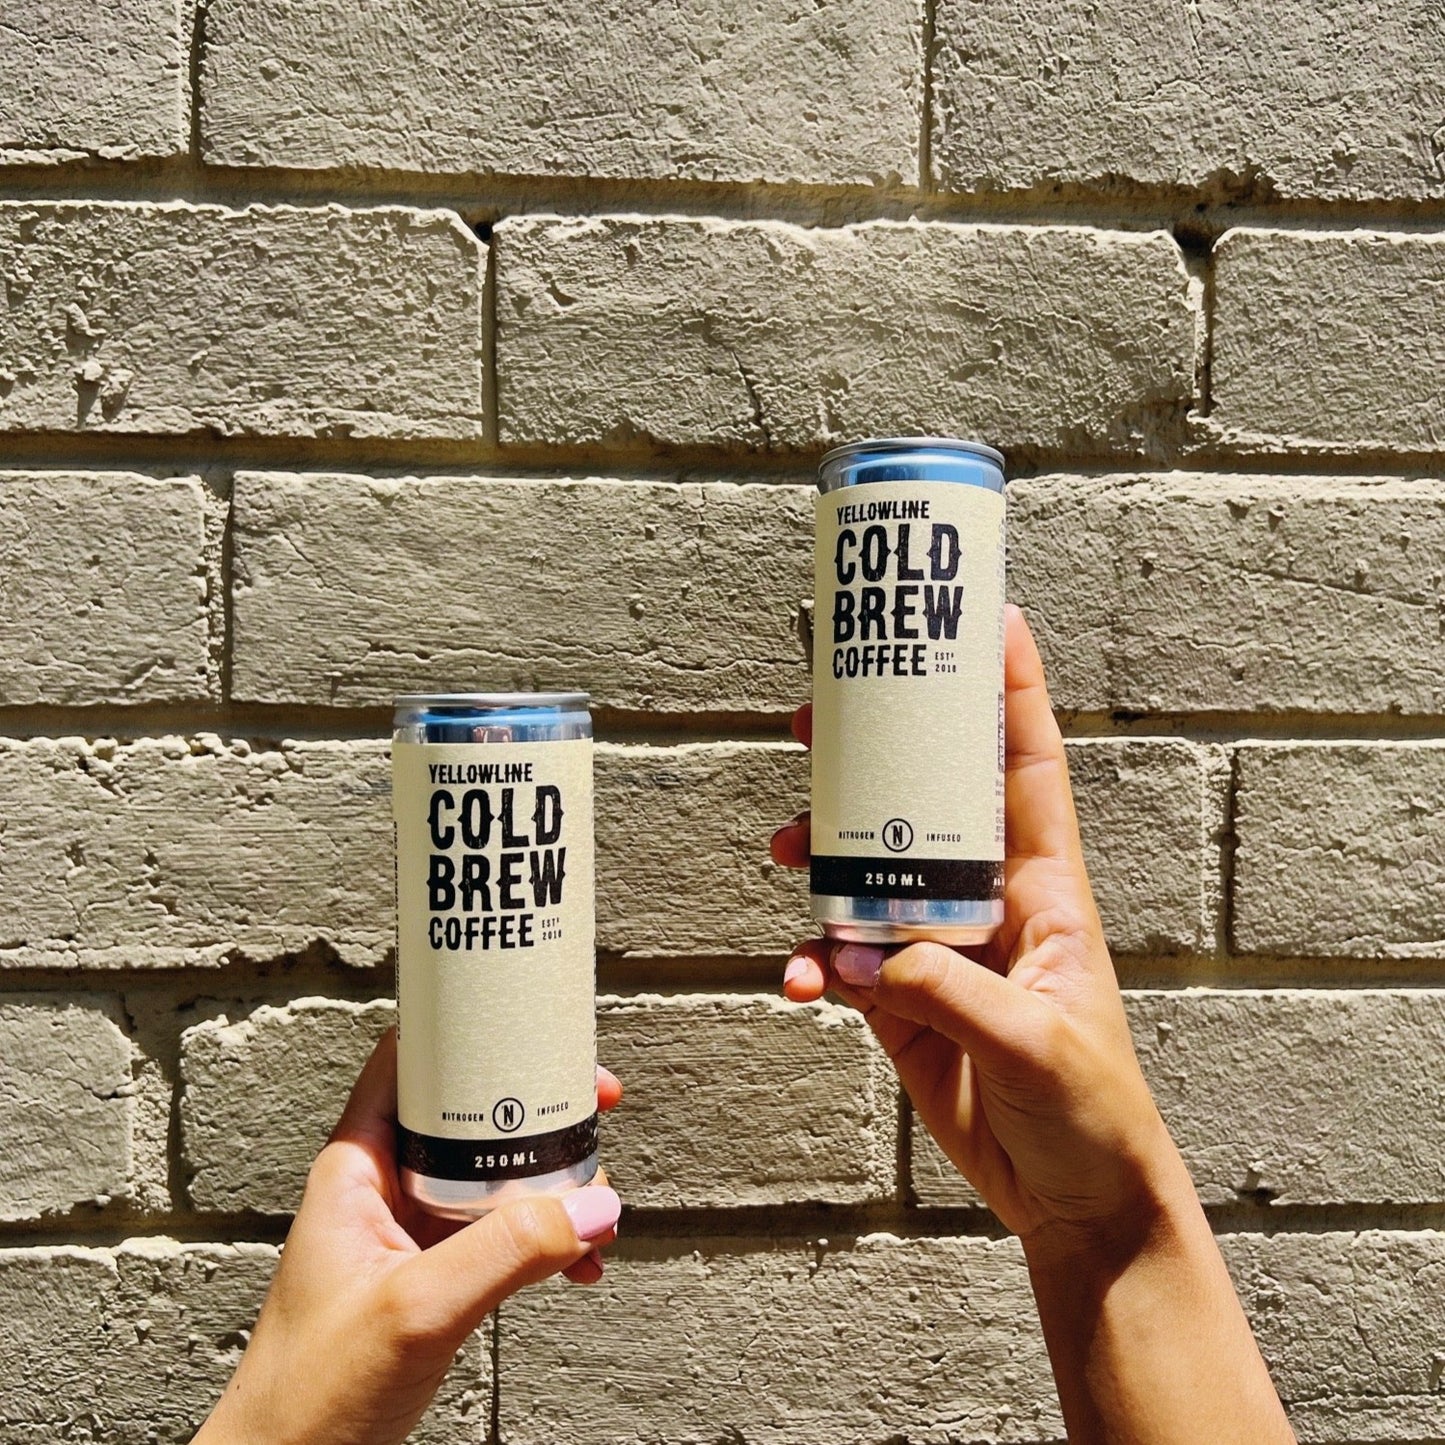 Yellowline Cold Brew Coffee Cans Held in Air